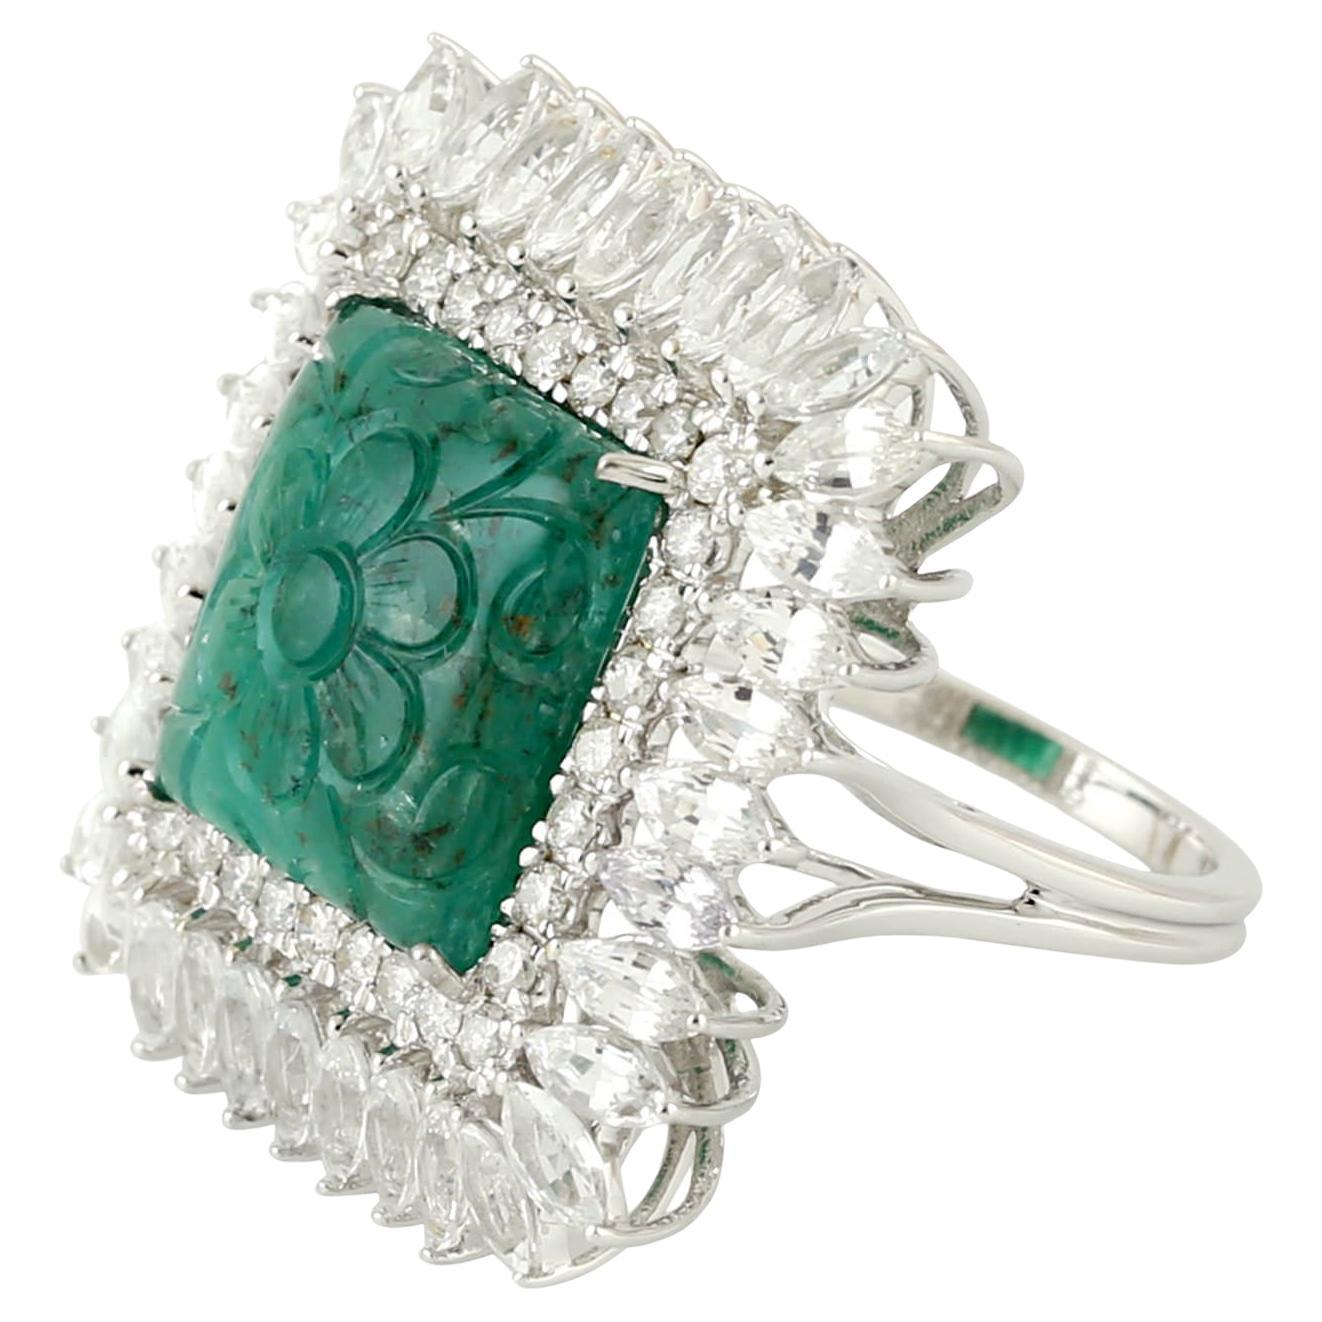 7.21 ct Carved Emerald Cocktail Ring With White Sapphire & Diamonds In 18k Gold For Sale